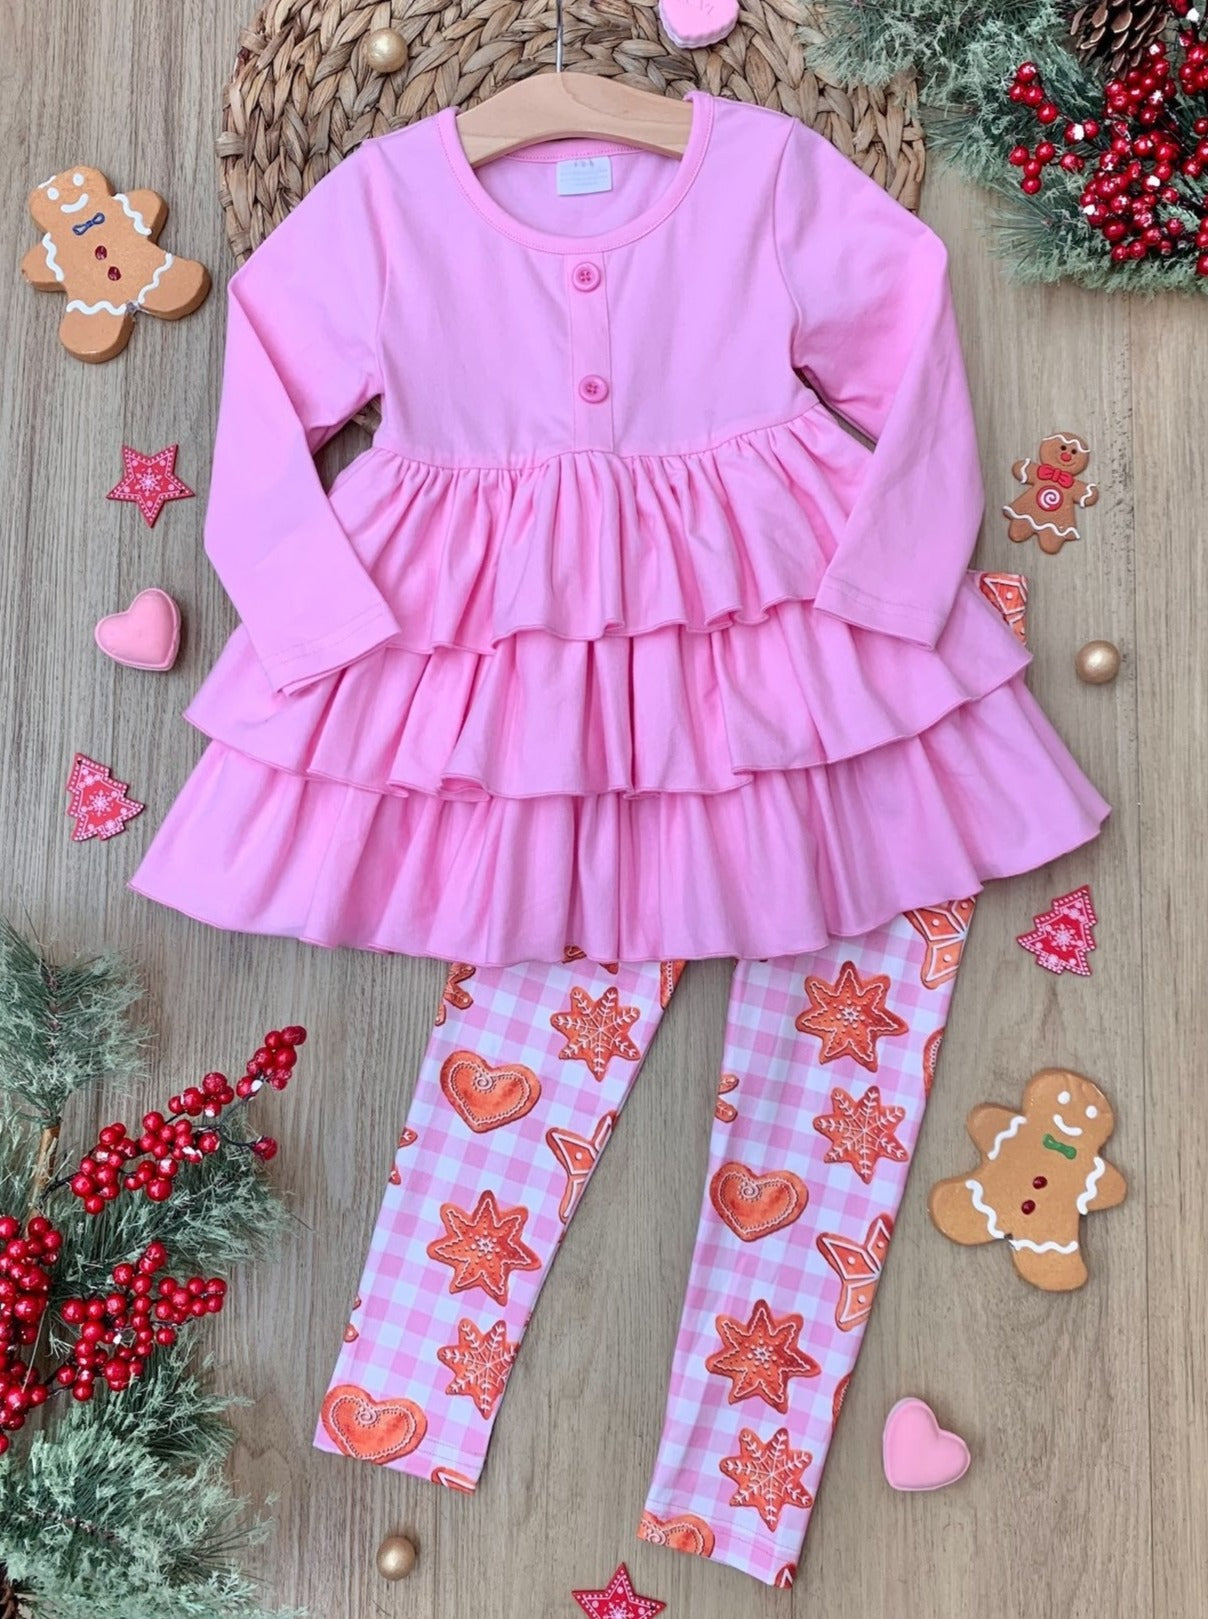 Mia Belle Girls Tiered Ruffle Top & Legging Set | Girls Winter Outfits